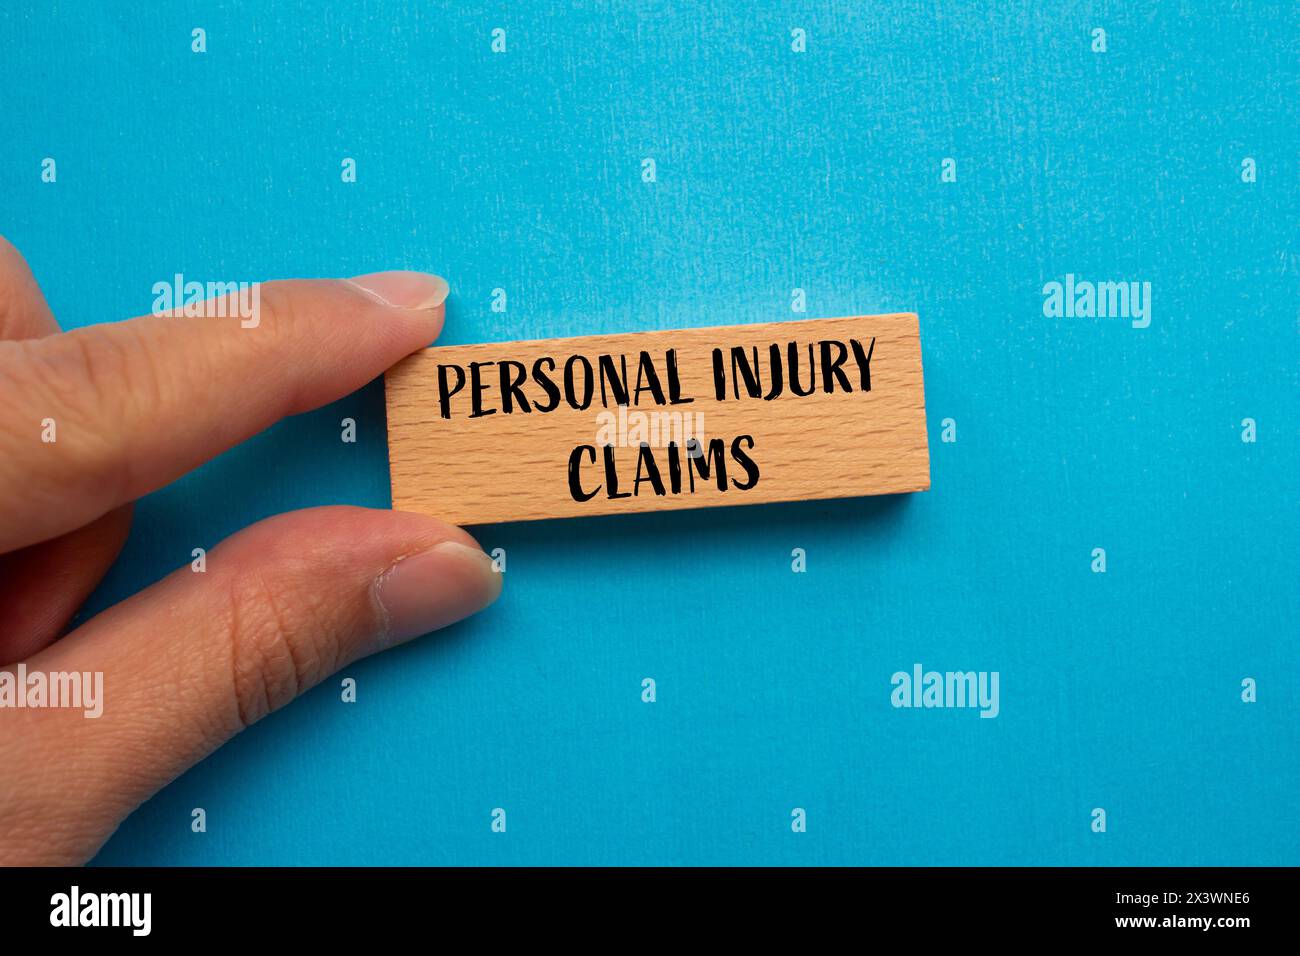 Conceptual personal injury claims symbol Stock Photo